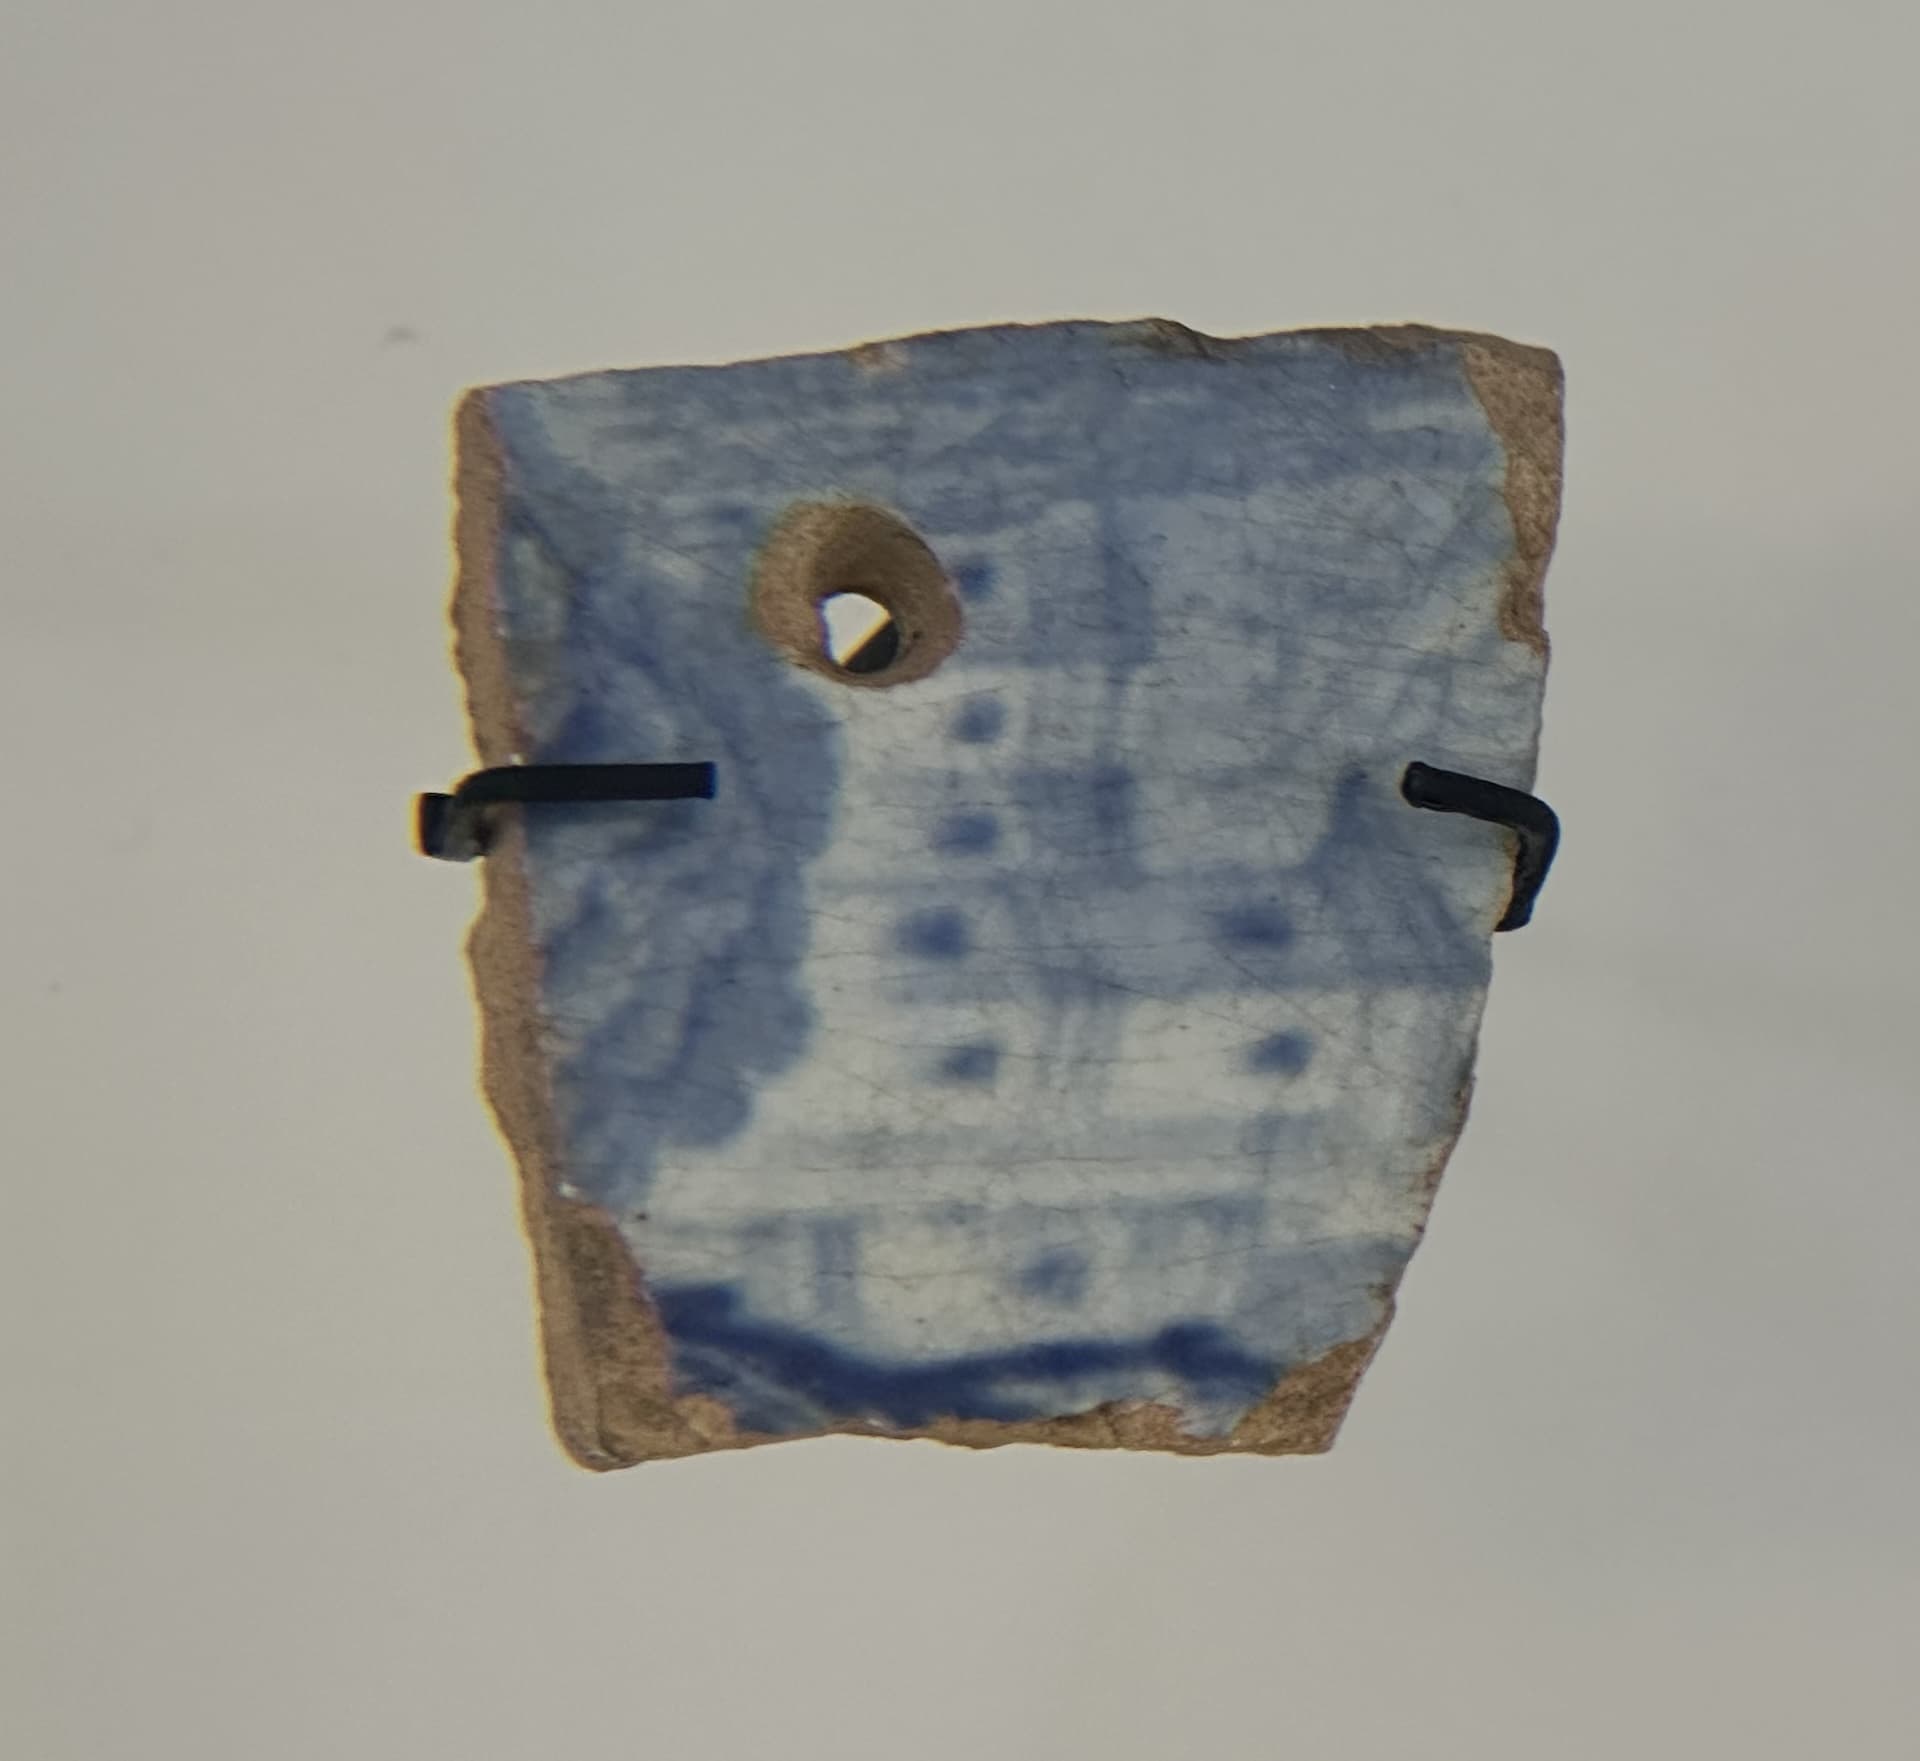 Ceramic pendant from the Historic period at the National Archaeological Museum